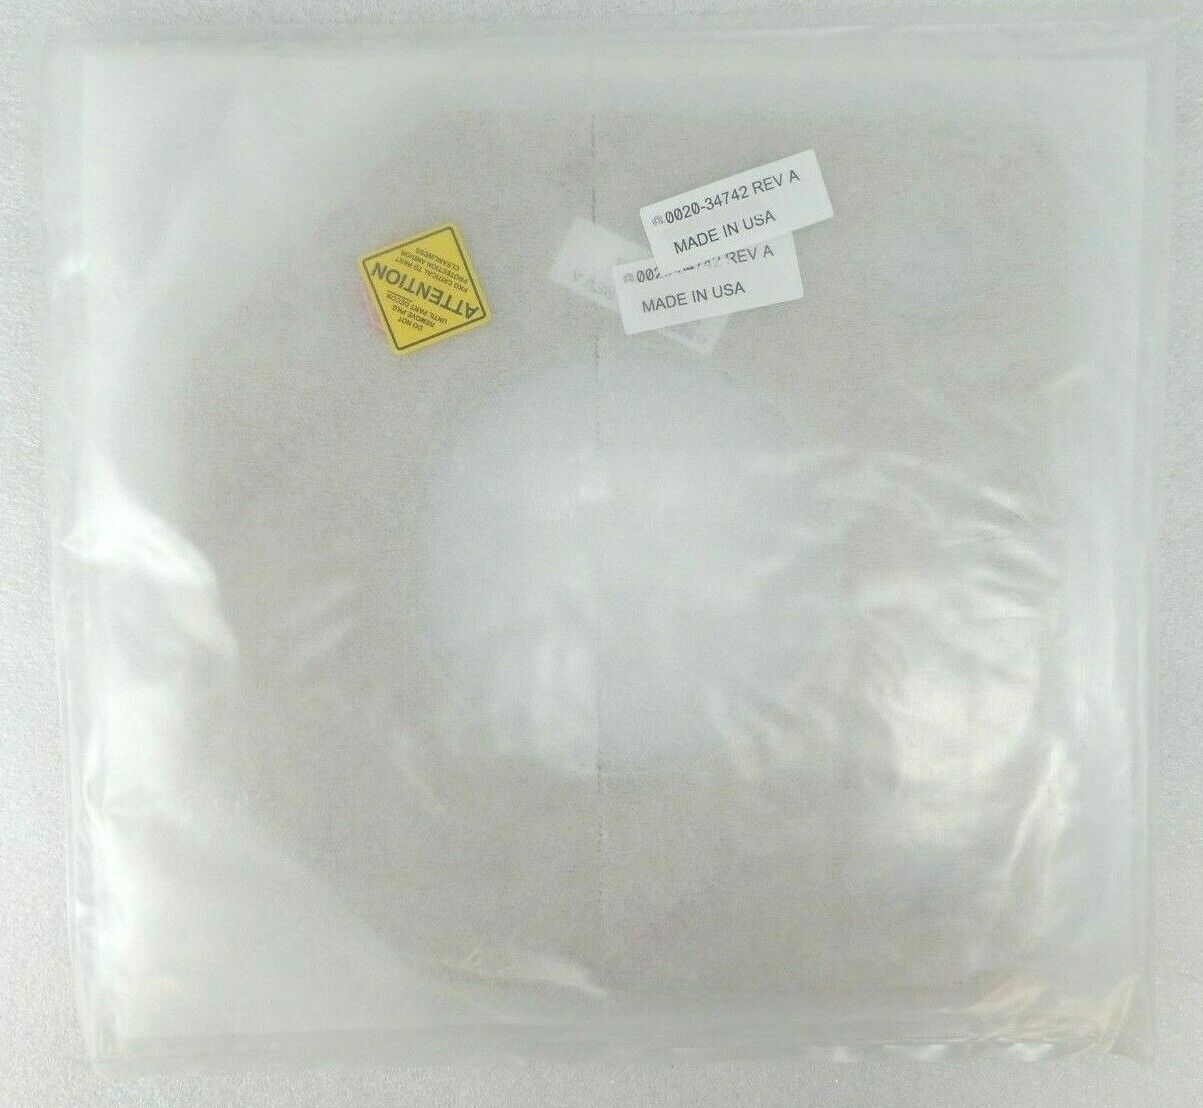 AMAT Applied Materials 0020-34742 150mm Centering Plate New Surplus